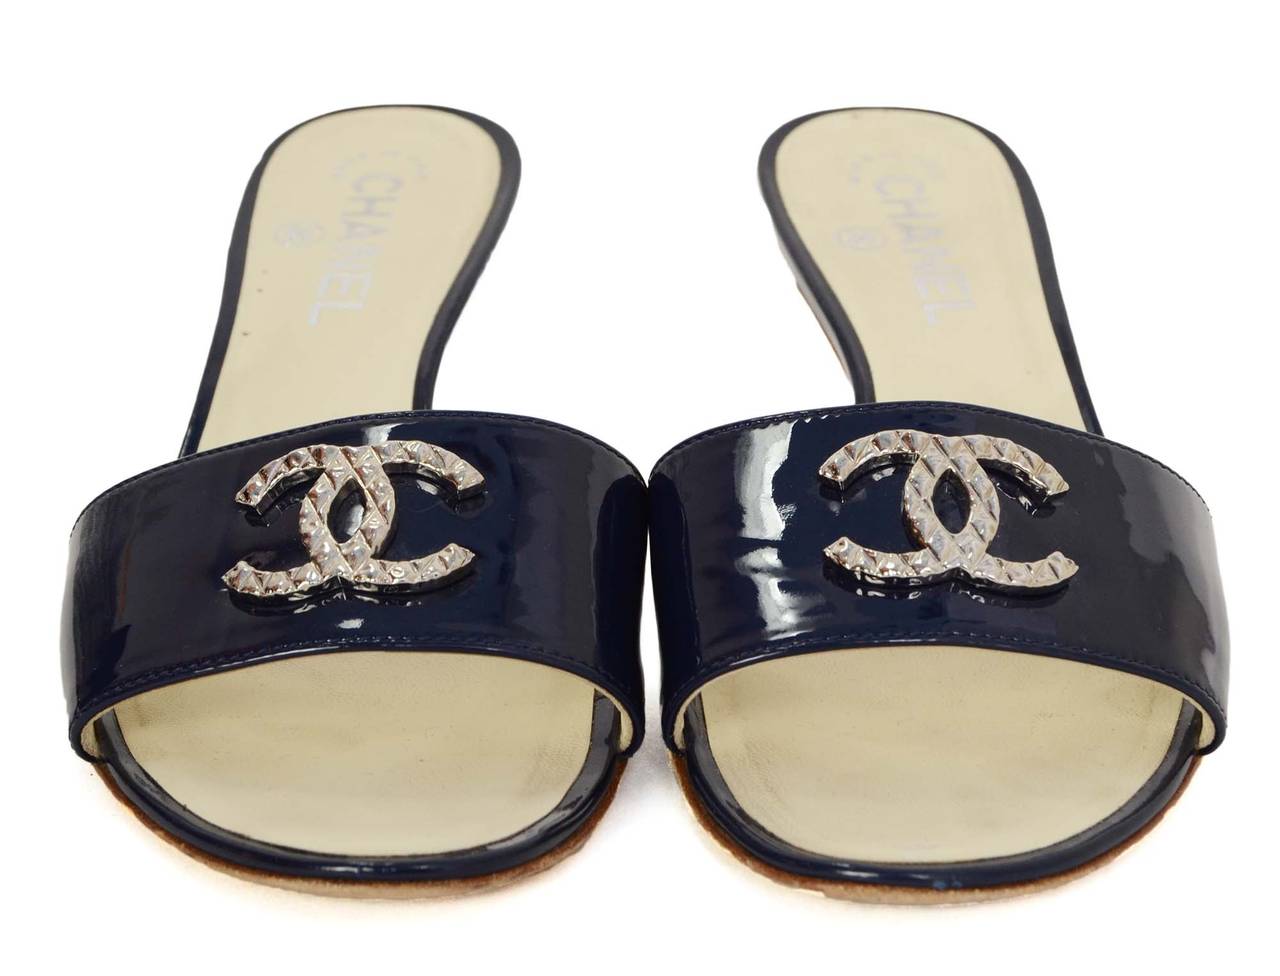 Chanel Navy Patent Mule Sandals
Features silvertone metal CC's at toes
Made in: Italy
Color: Navy, ivory and silvertone
Composition: Patent leather, leather and metal
Sole Stamp: CC Made in Italy 38
Closure/opening: Slide on
Overall